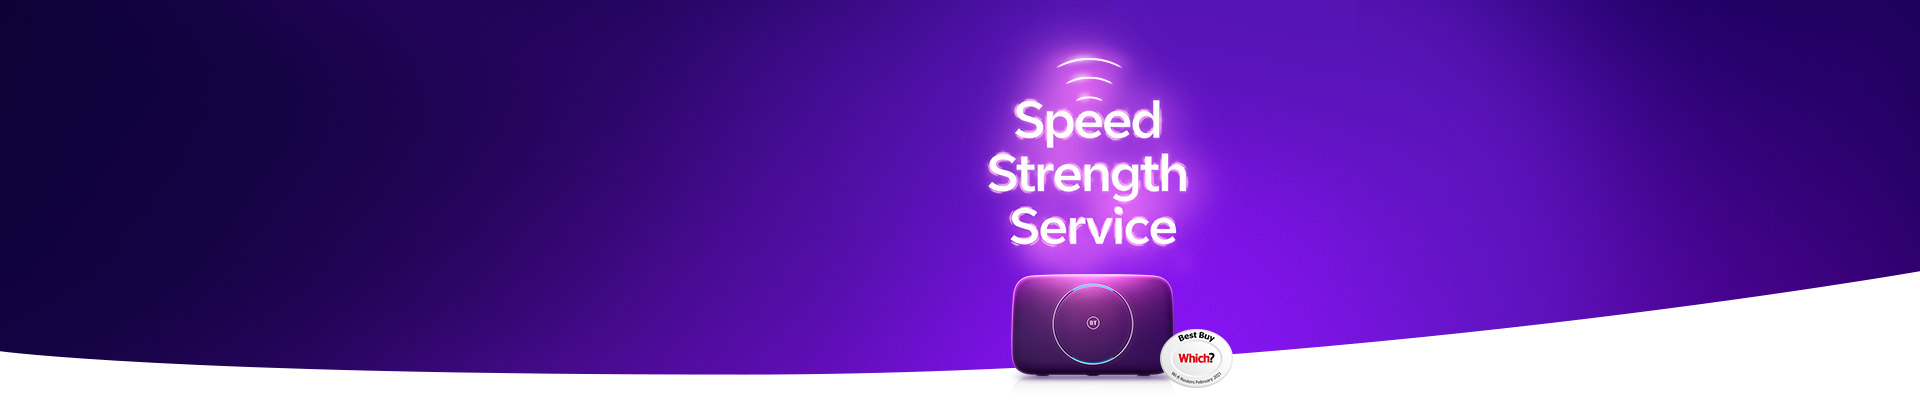 Our broadband deals give you speed, strength, security and a Smart Hub that’s a Which Best Buy.